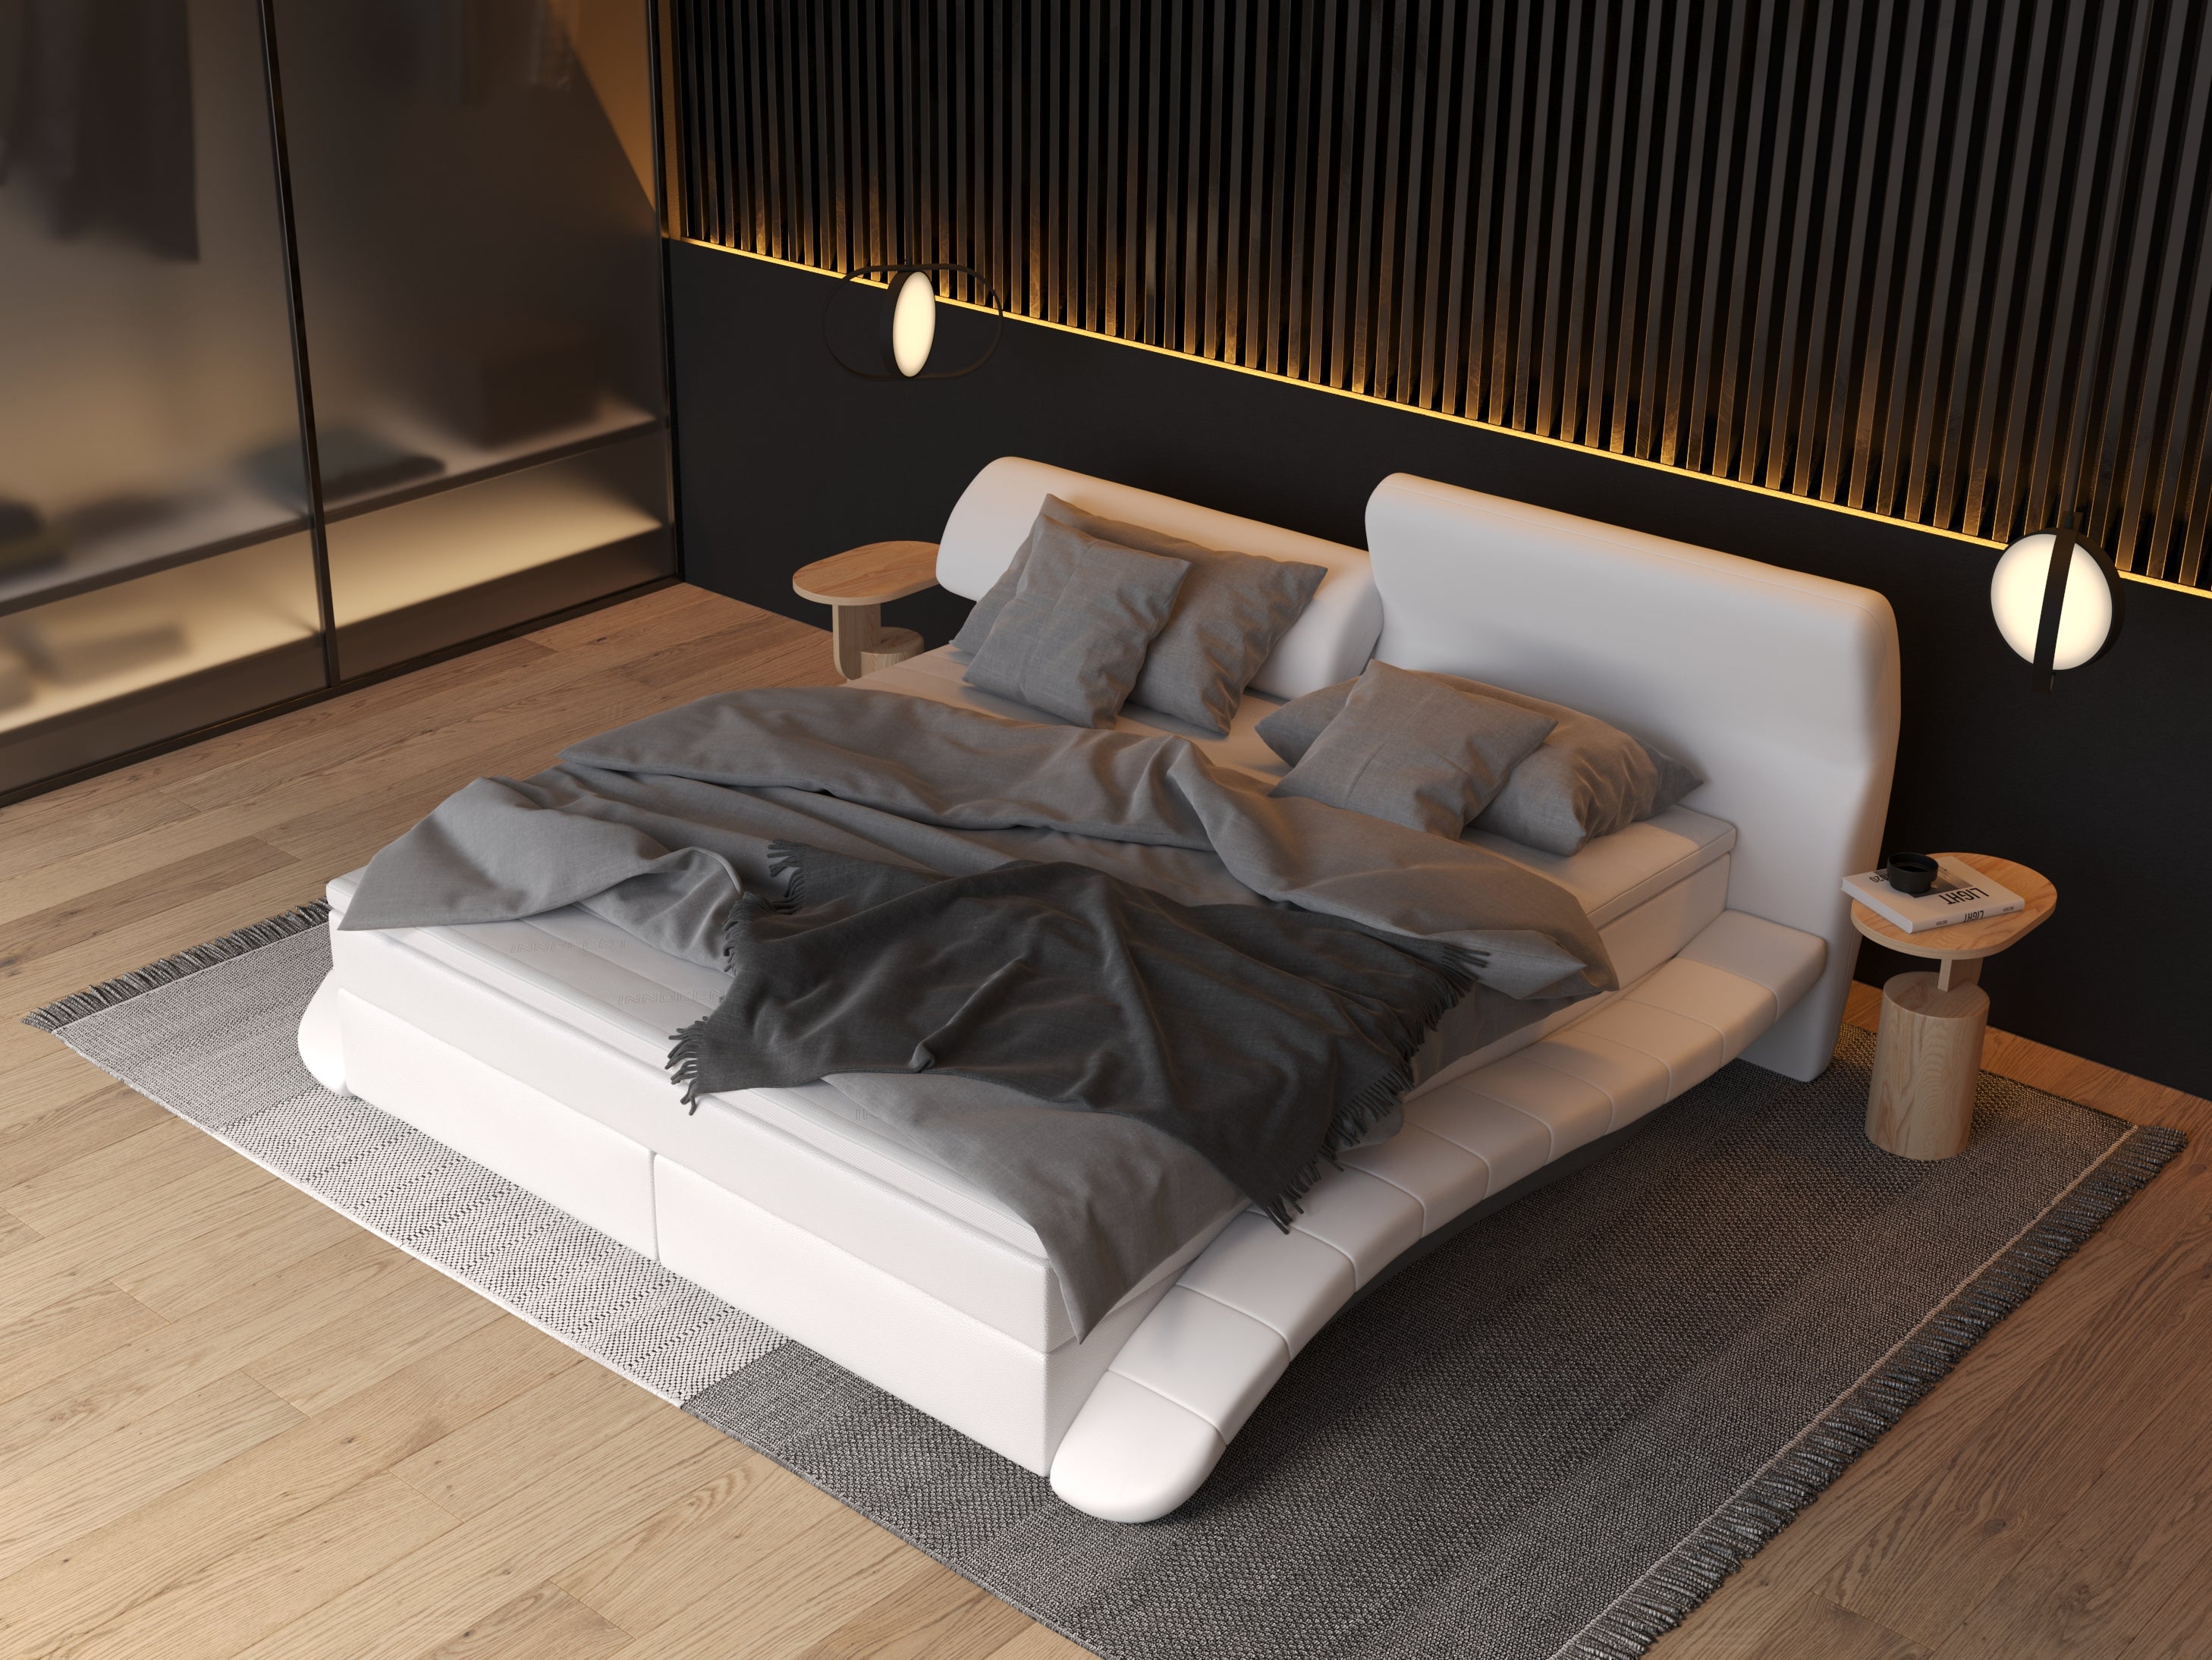 BOX-124-MILONI: Bestseller Boxspringbed for Unmatched Comfort and Stylish Design